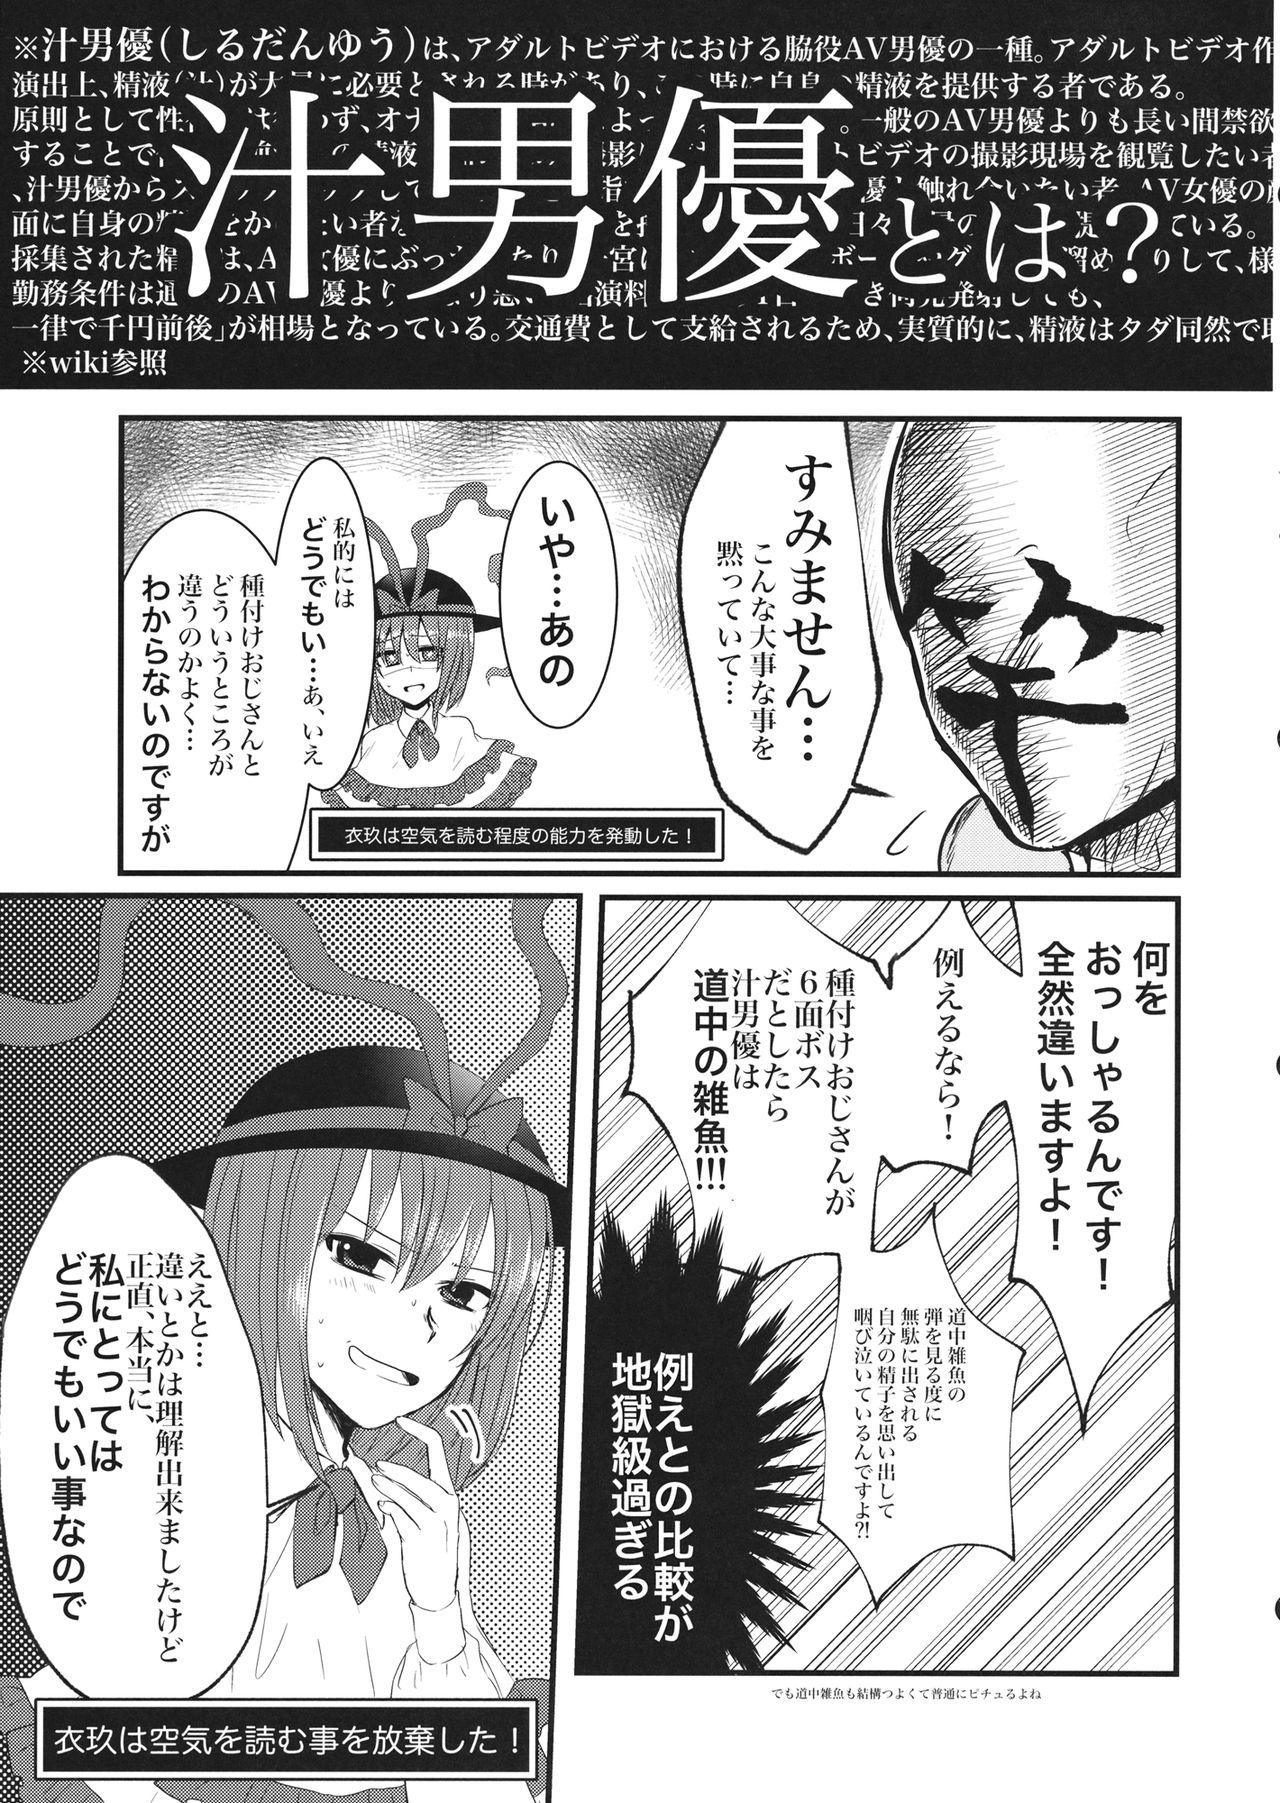 Private 衣玖さんと一緒に色々頑張る本 - Touhou project Facial - Page 6